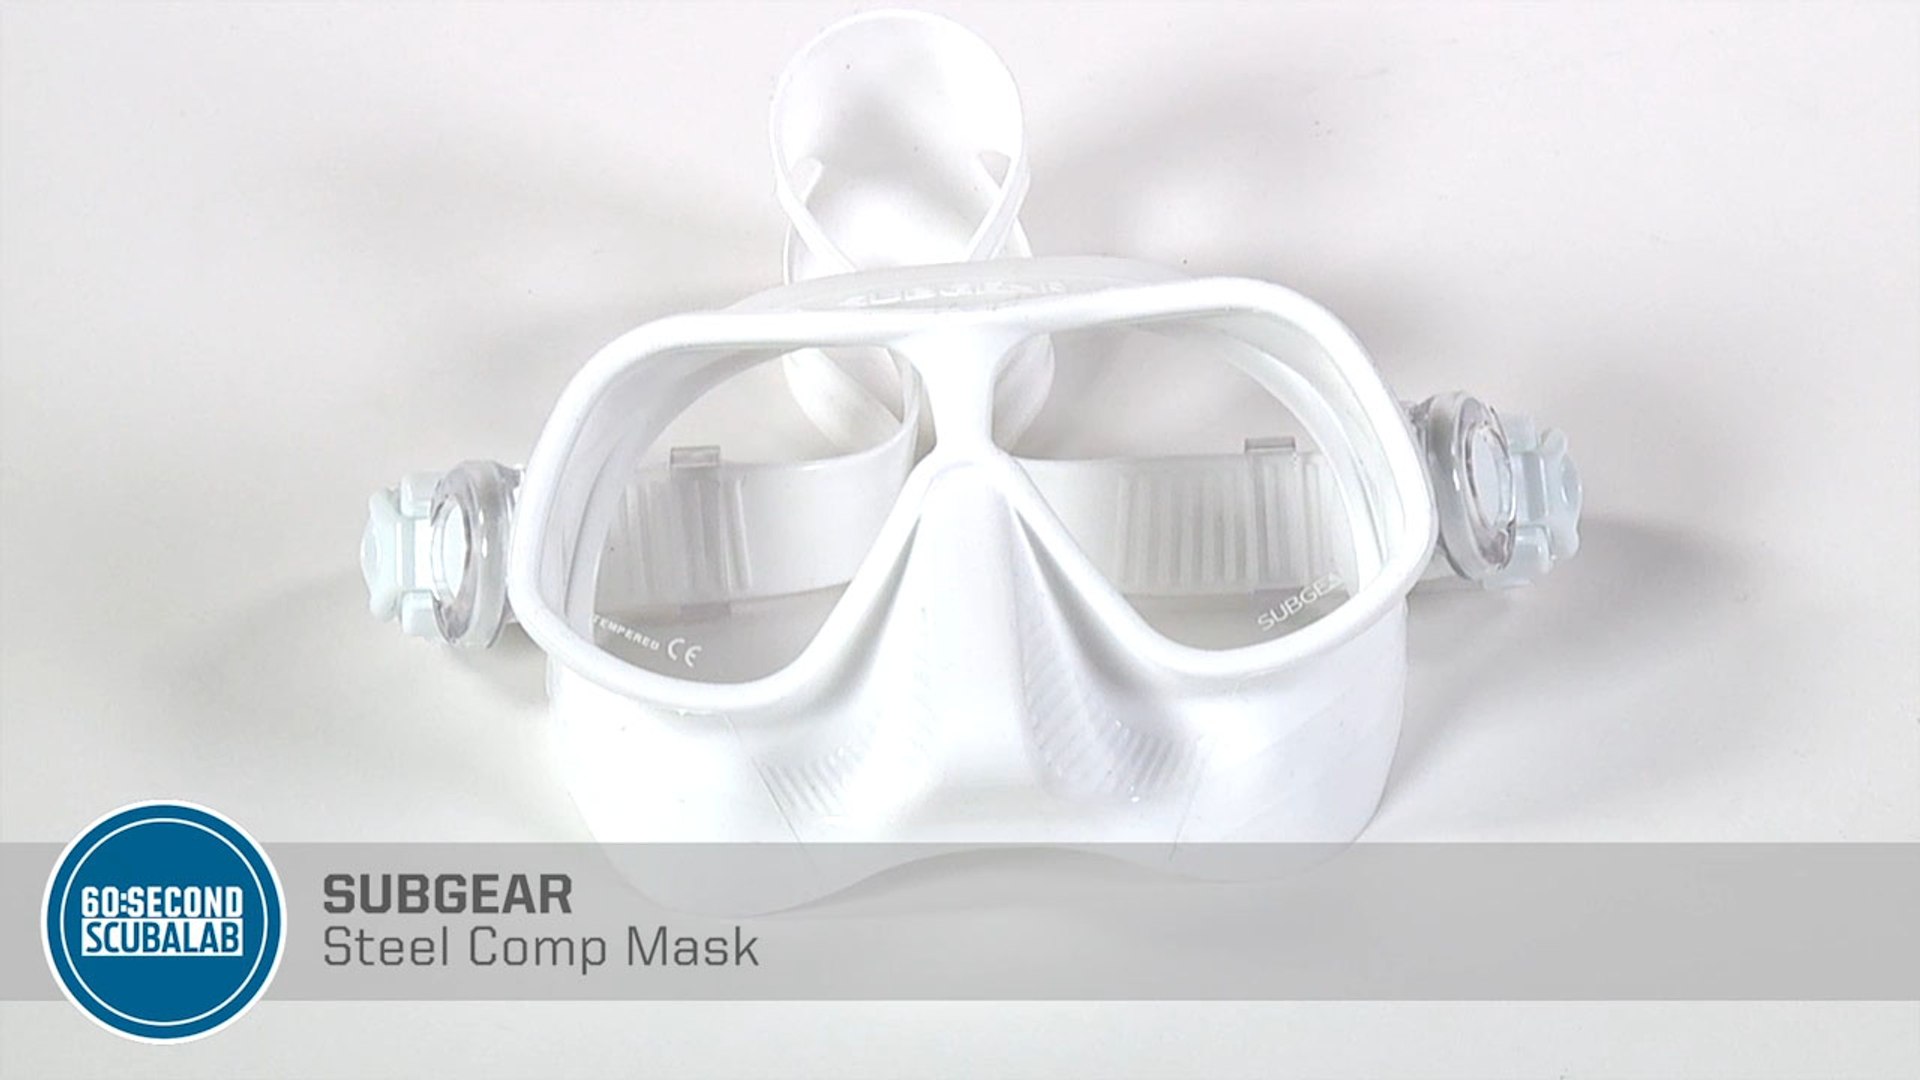 60: Second ScubaLab - SUBGEAR Steel Comp Mask - video Dailymotion